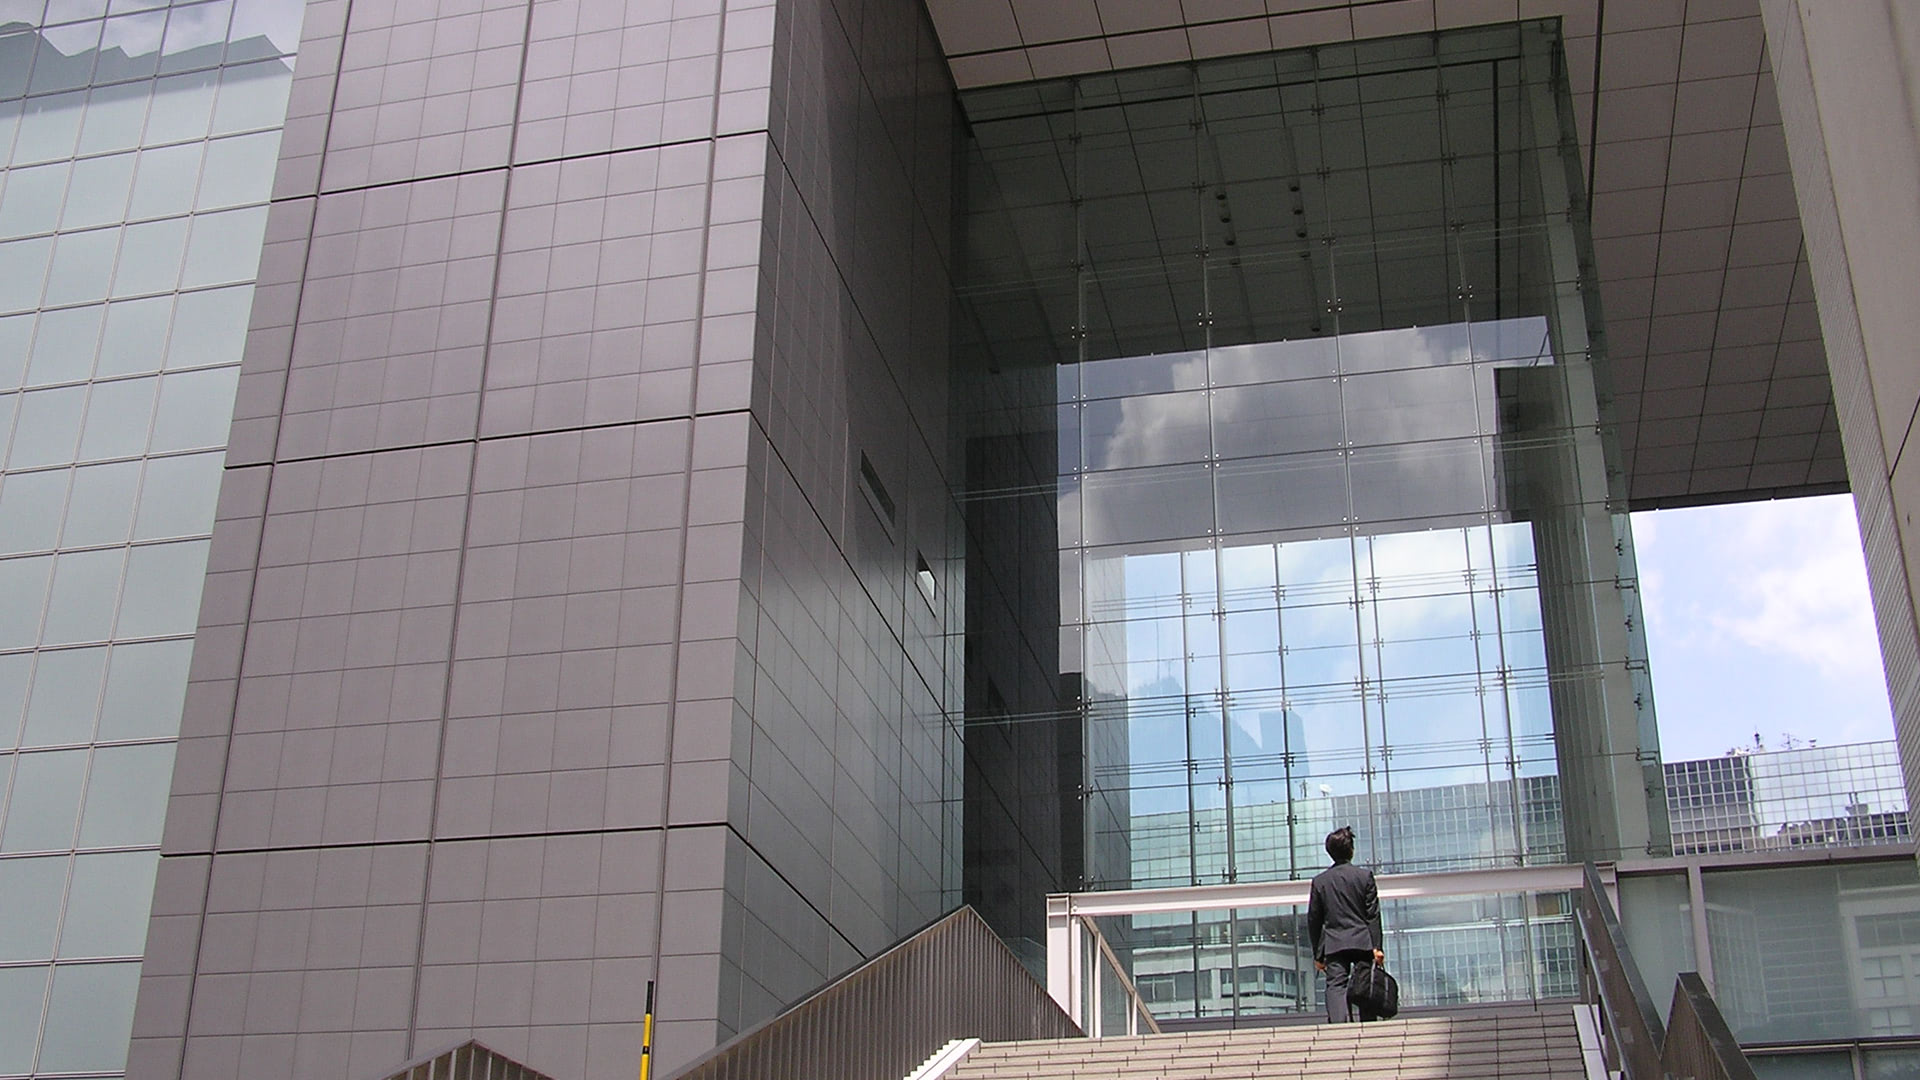 Man standing at top of stairs looking at large building entrance